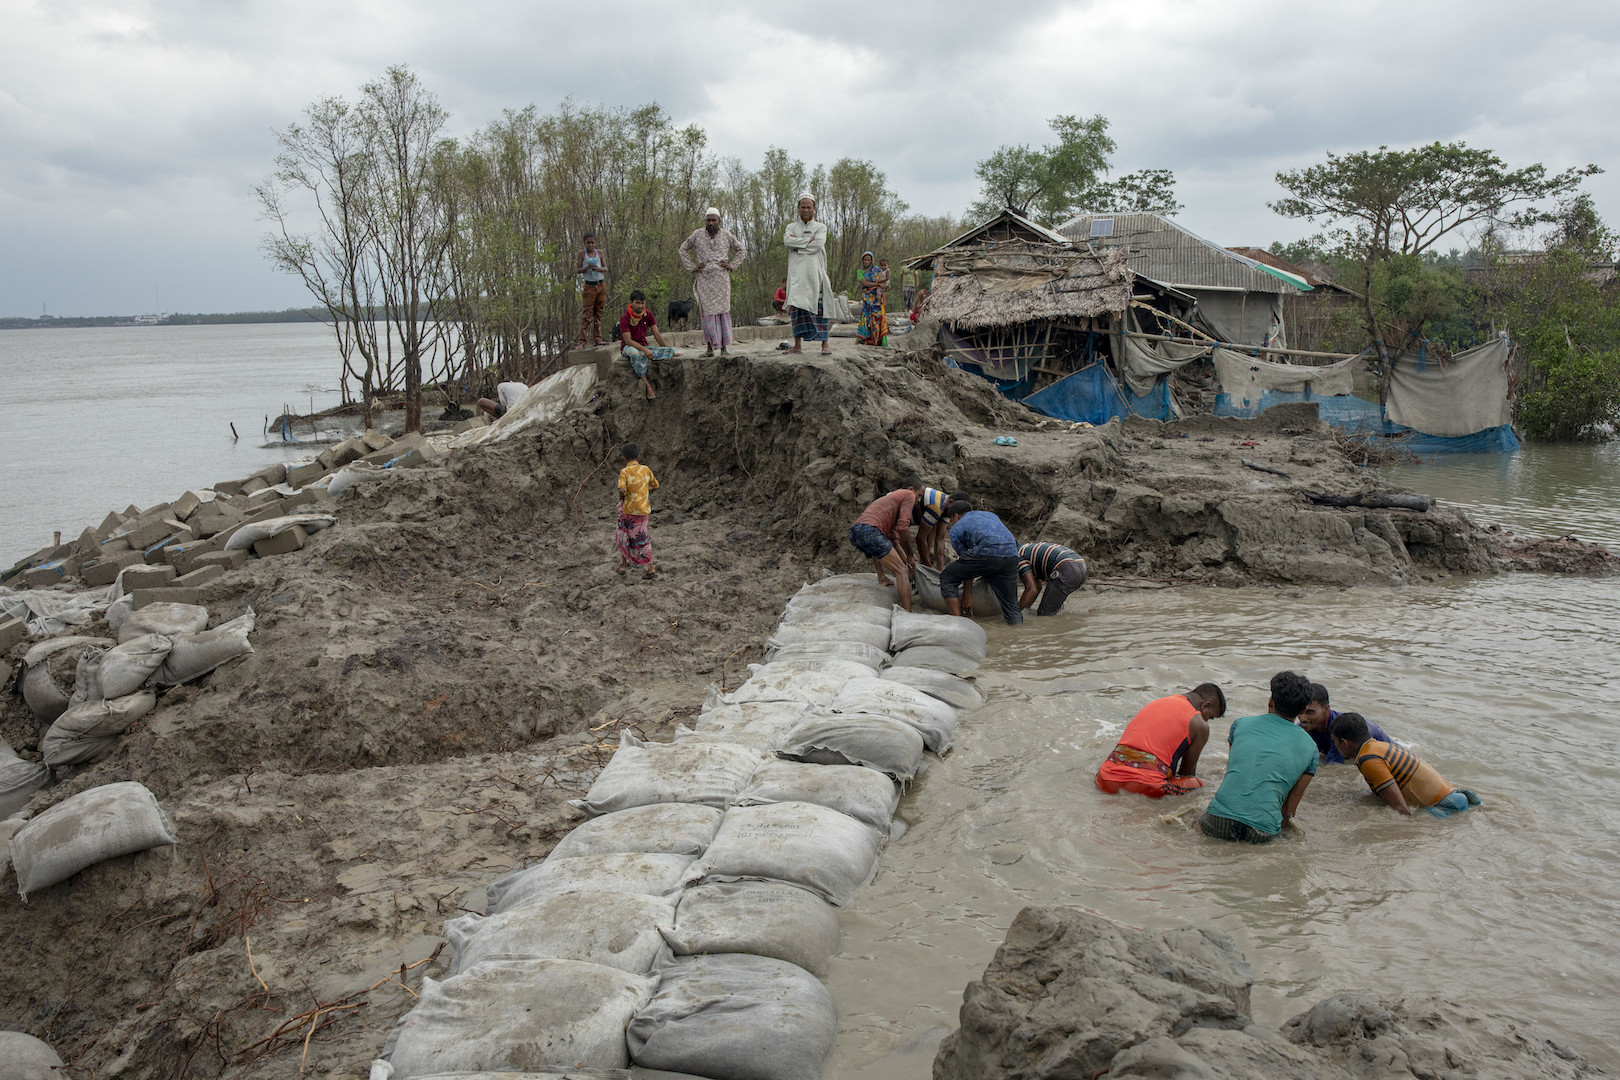 Village people try to repair the broken dam after the landfall of cyclone Amphan in Satkhira, a town on the Bay of Bengal, in Spring 2020.